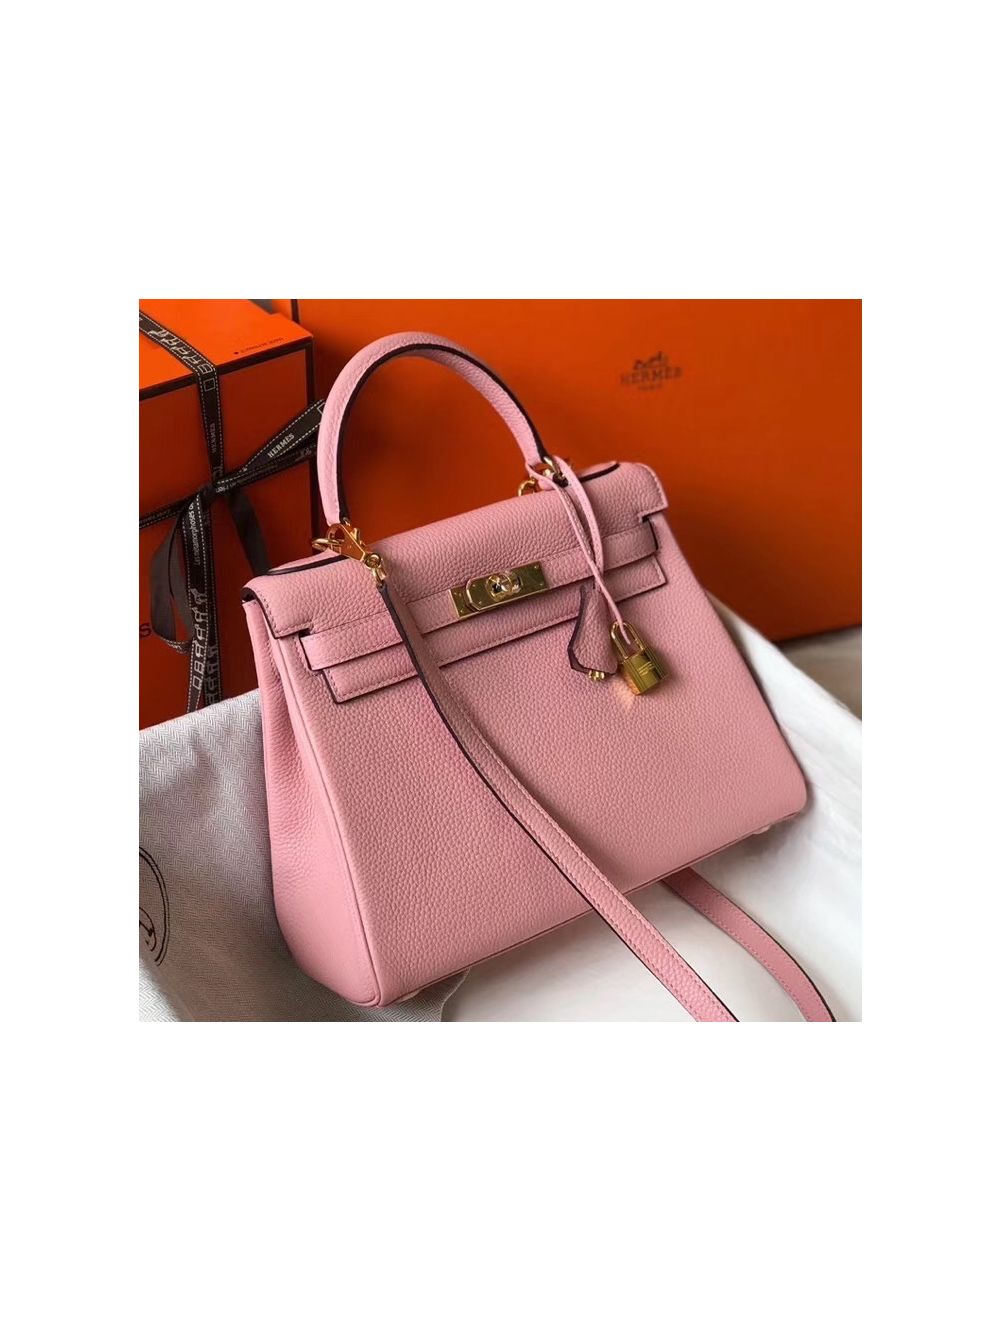 Replica Hermes Kelly 25cm Retourne Bag In Pink Clemence Leather